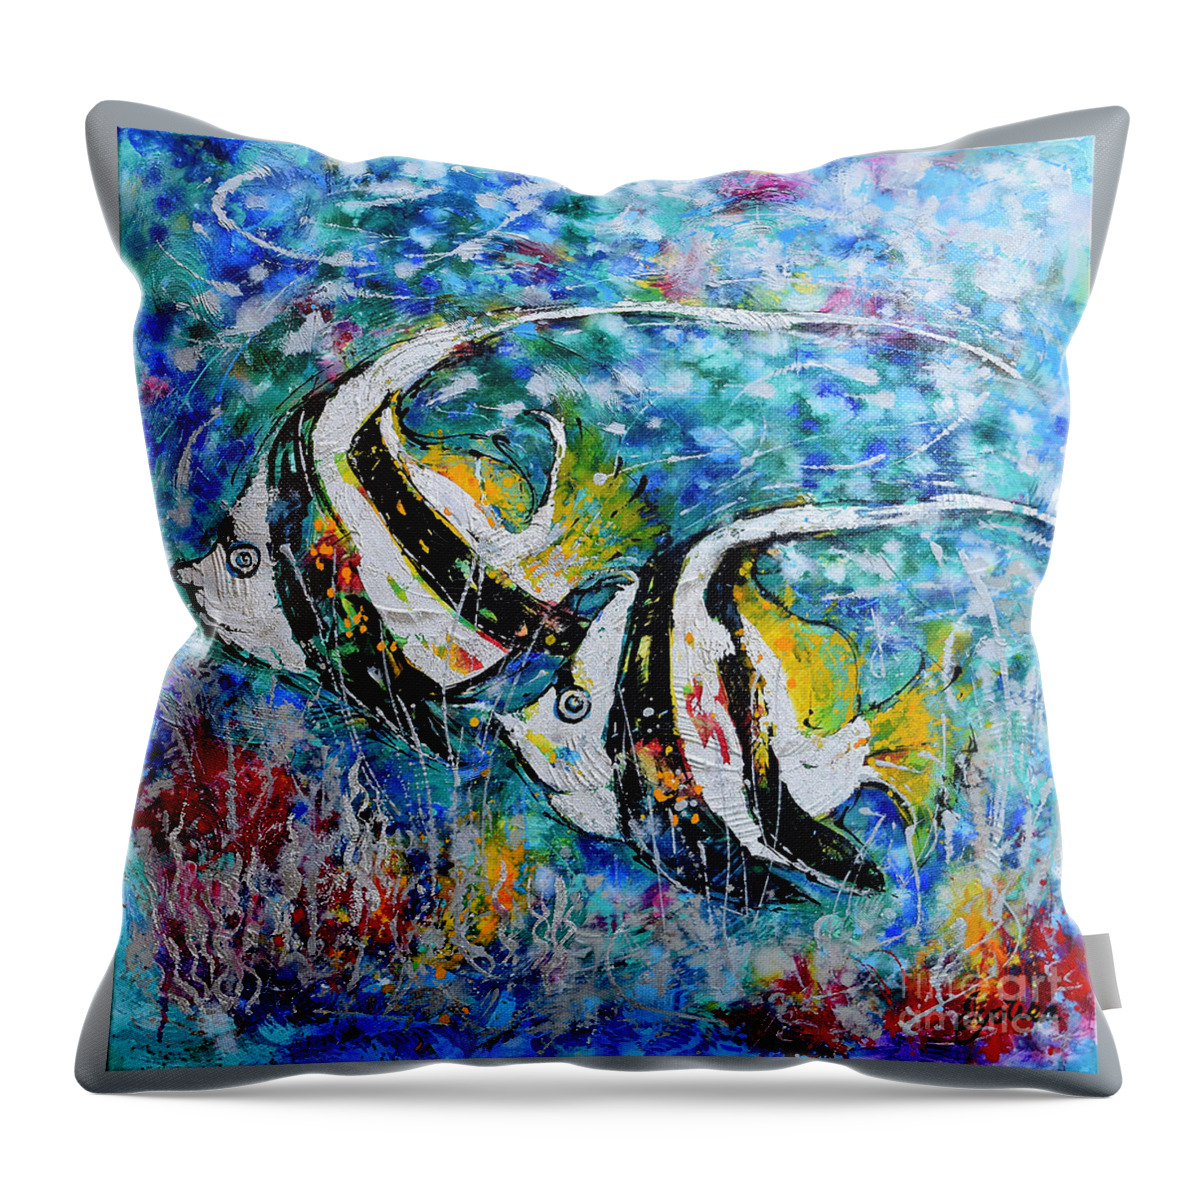 Angel Fish Throw Pillow featuring the painting Angel Fish by Jyotika Shroff